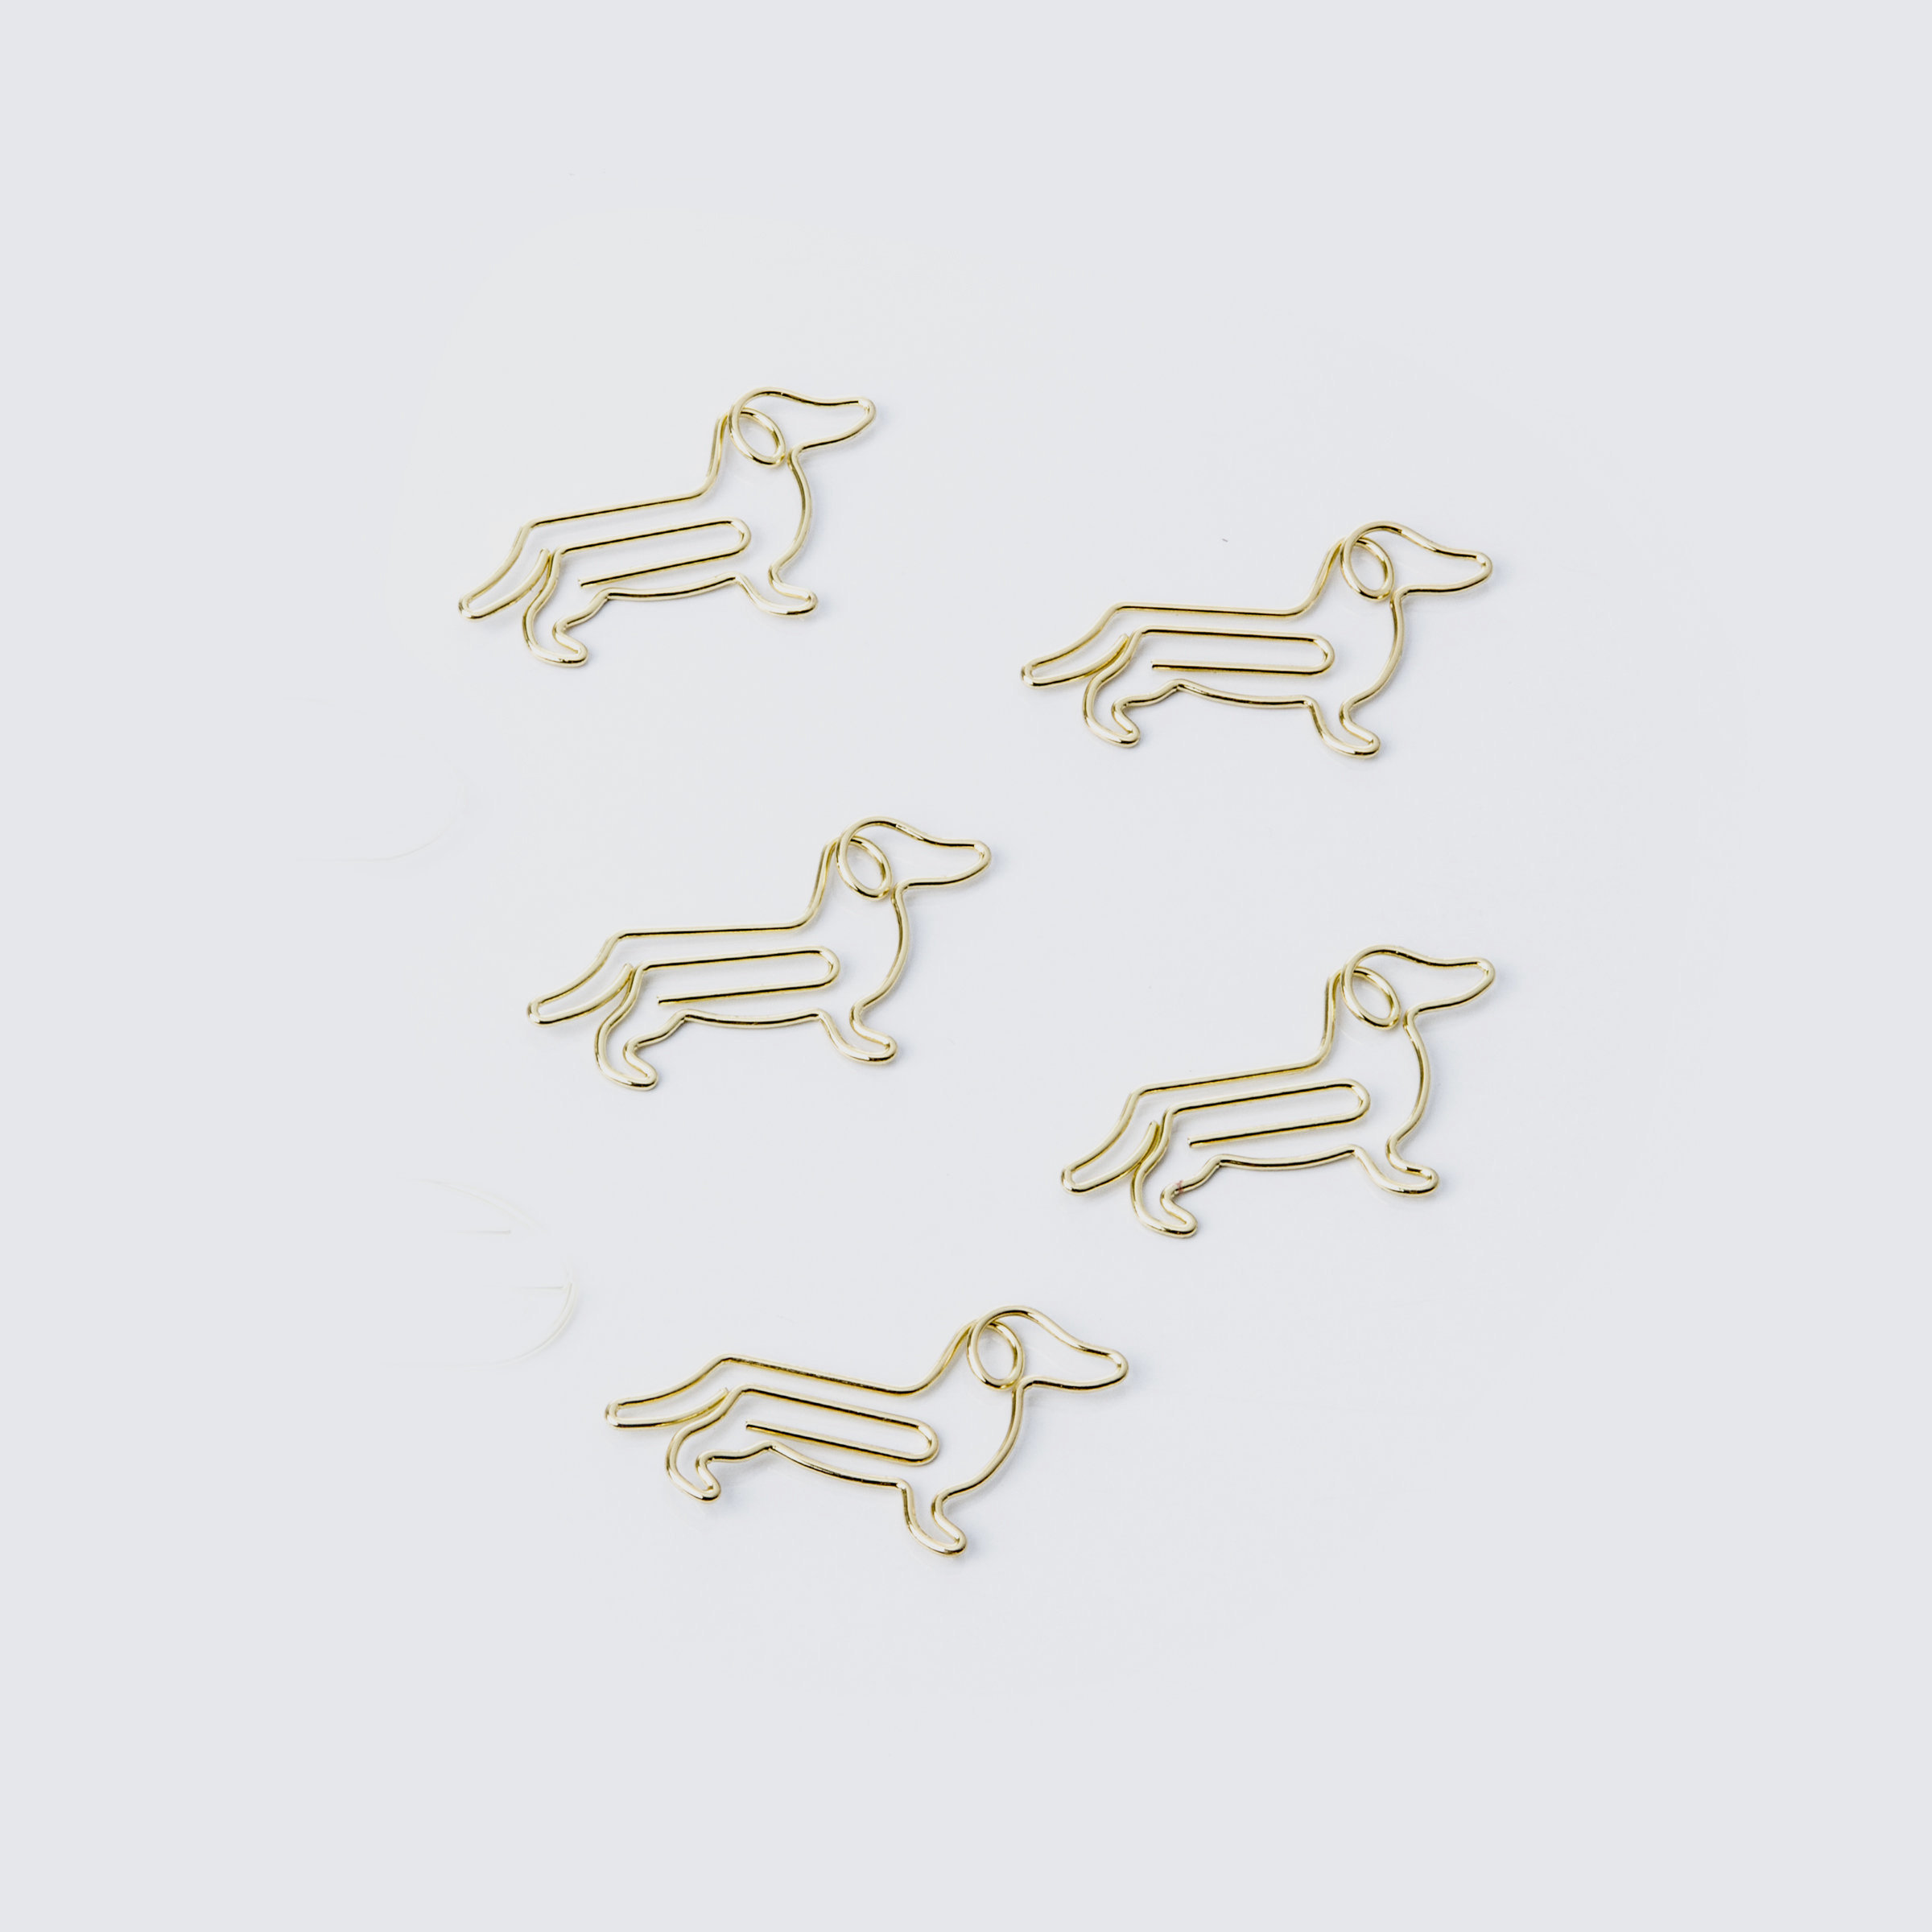 Gold dog shaped paper clips